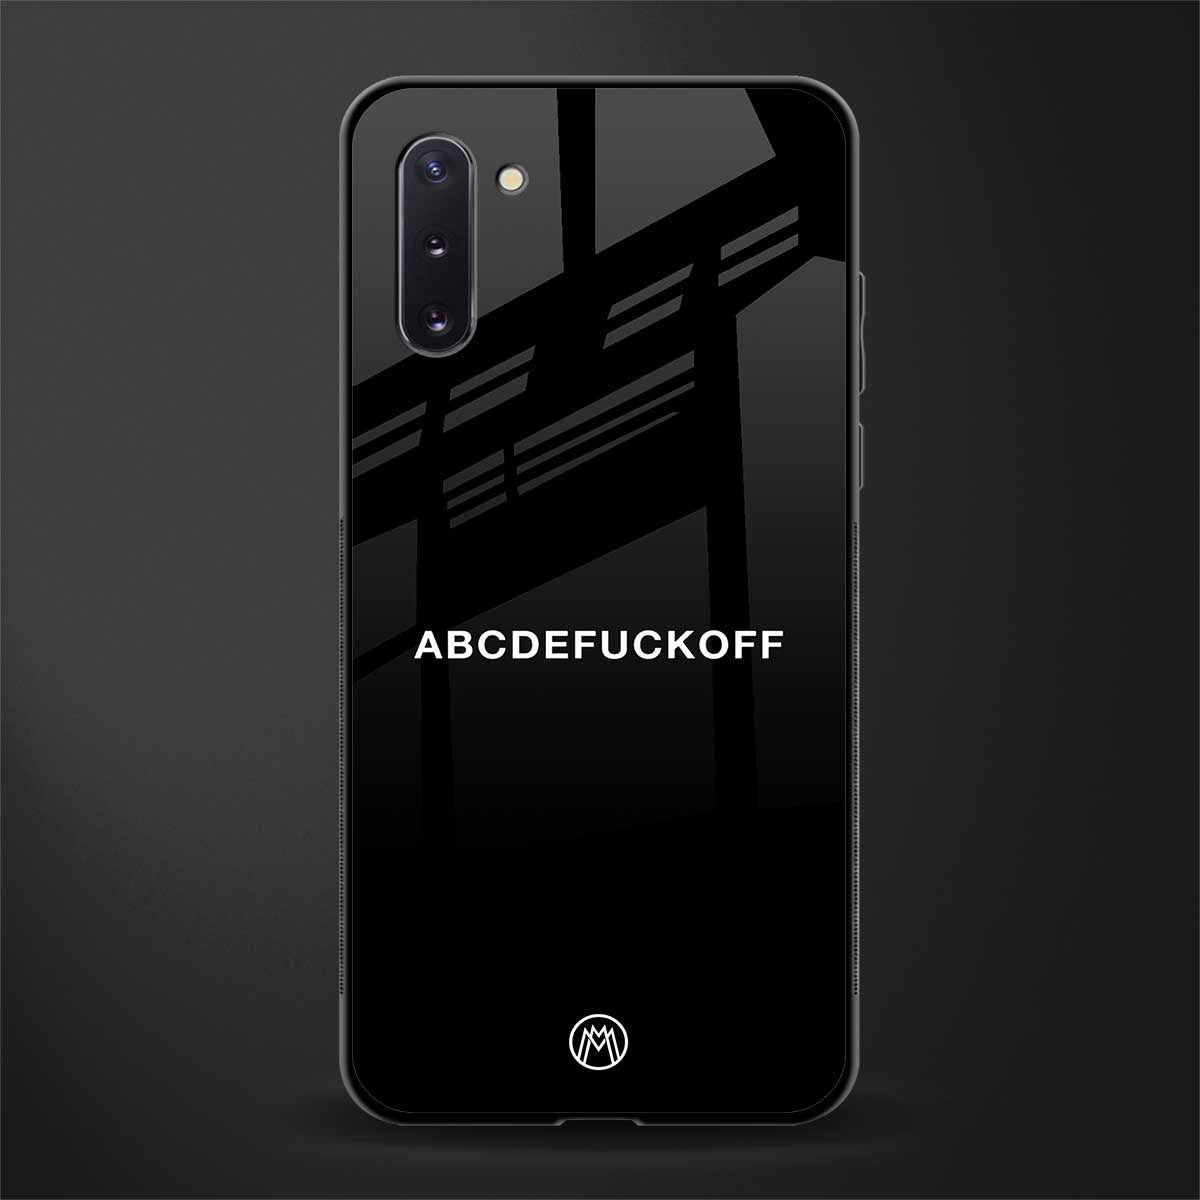 abcdefuckoff glass case for samsung galaxy note 10 image